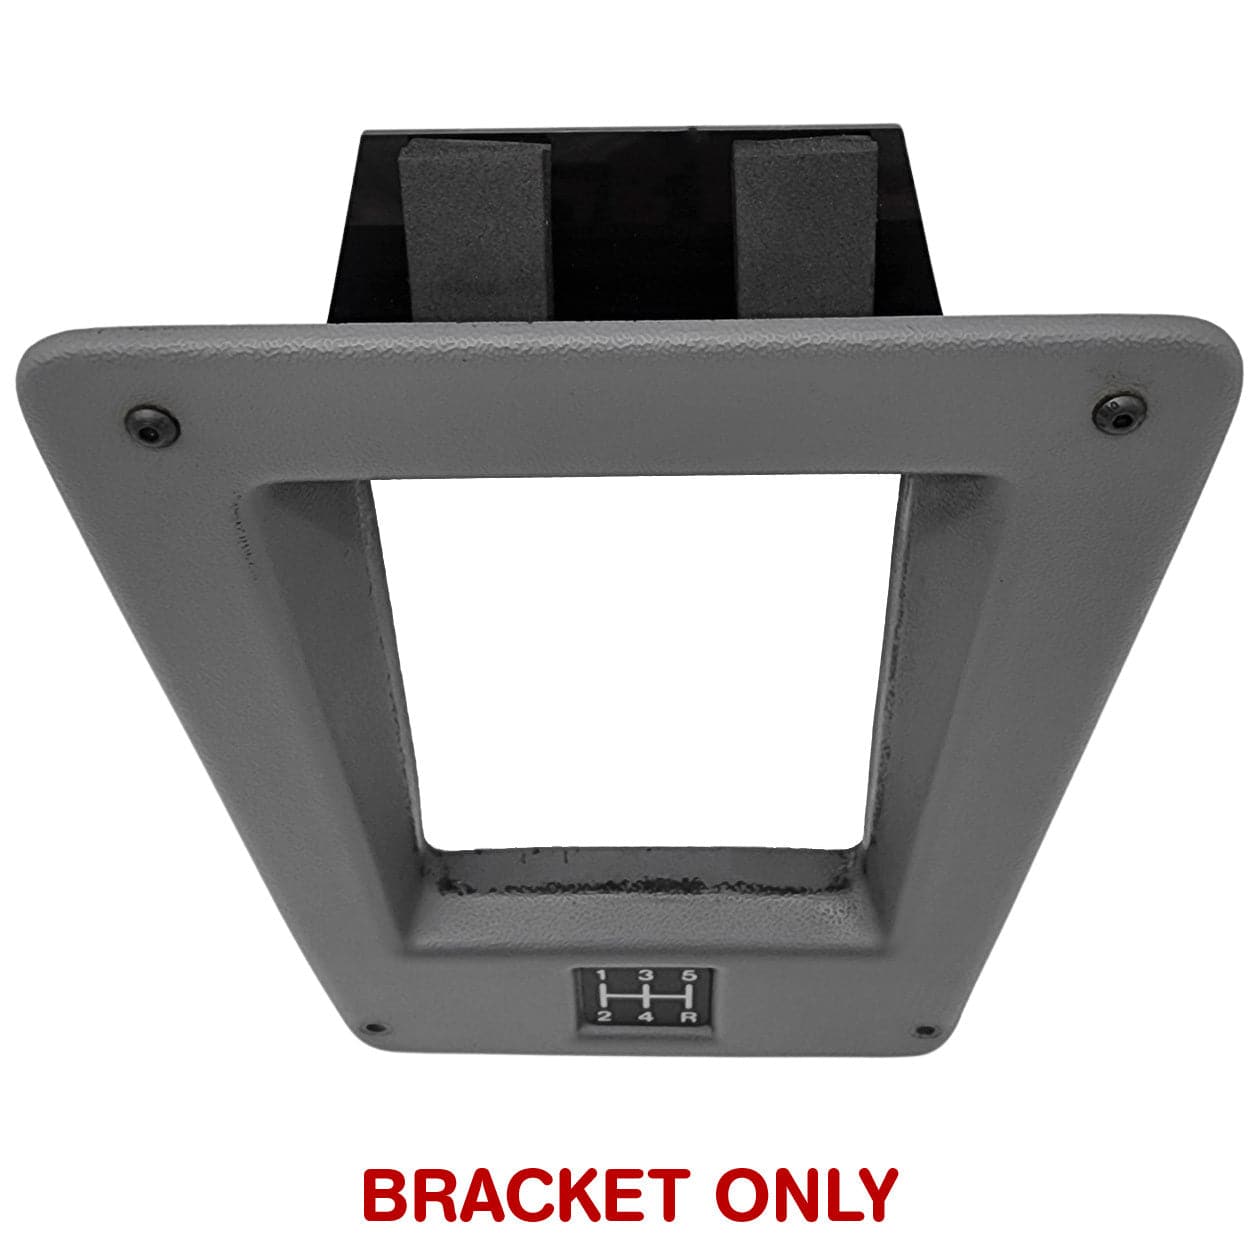 SHIFTER SURROUND TRIM BRACKET for VL WALKINSHAW and SS